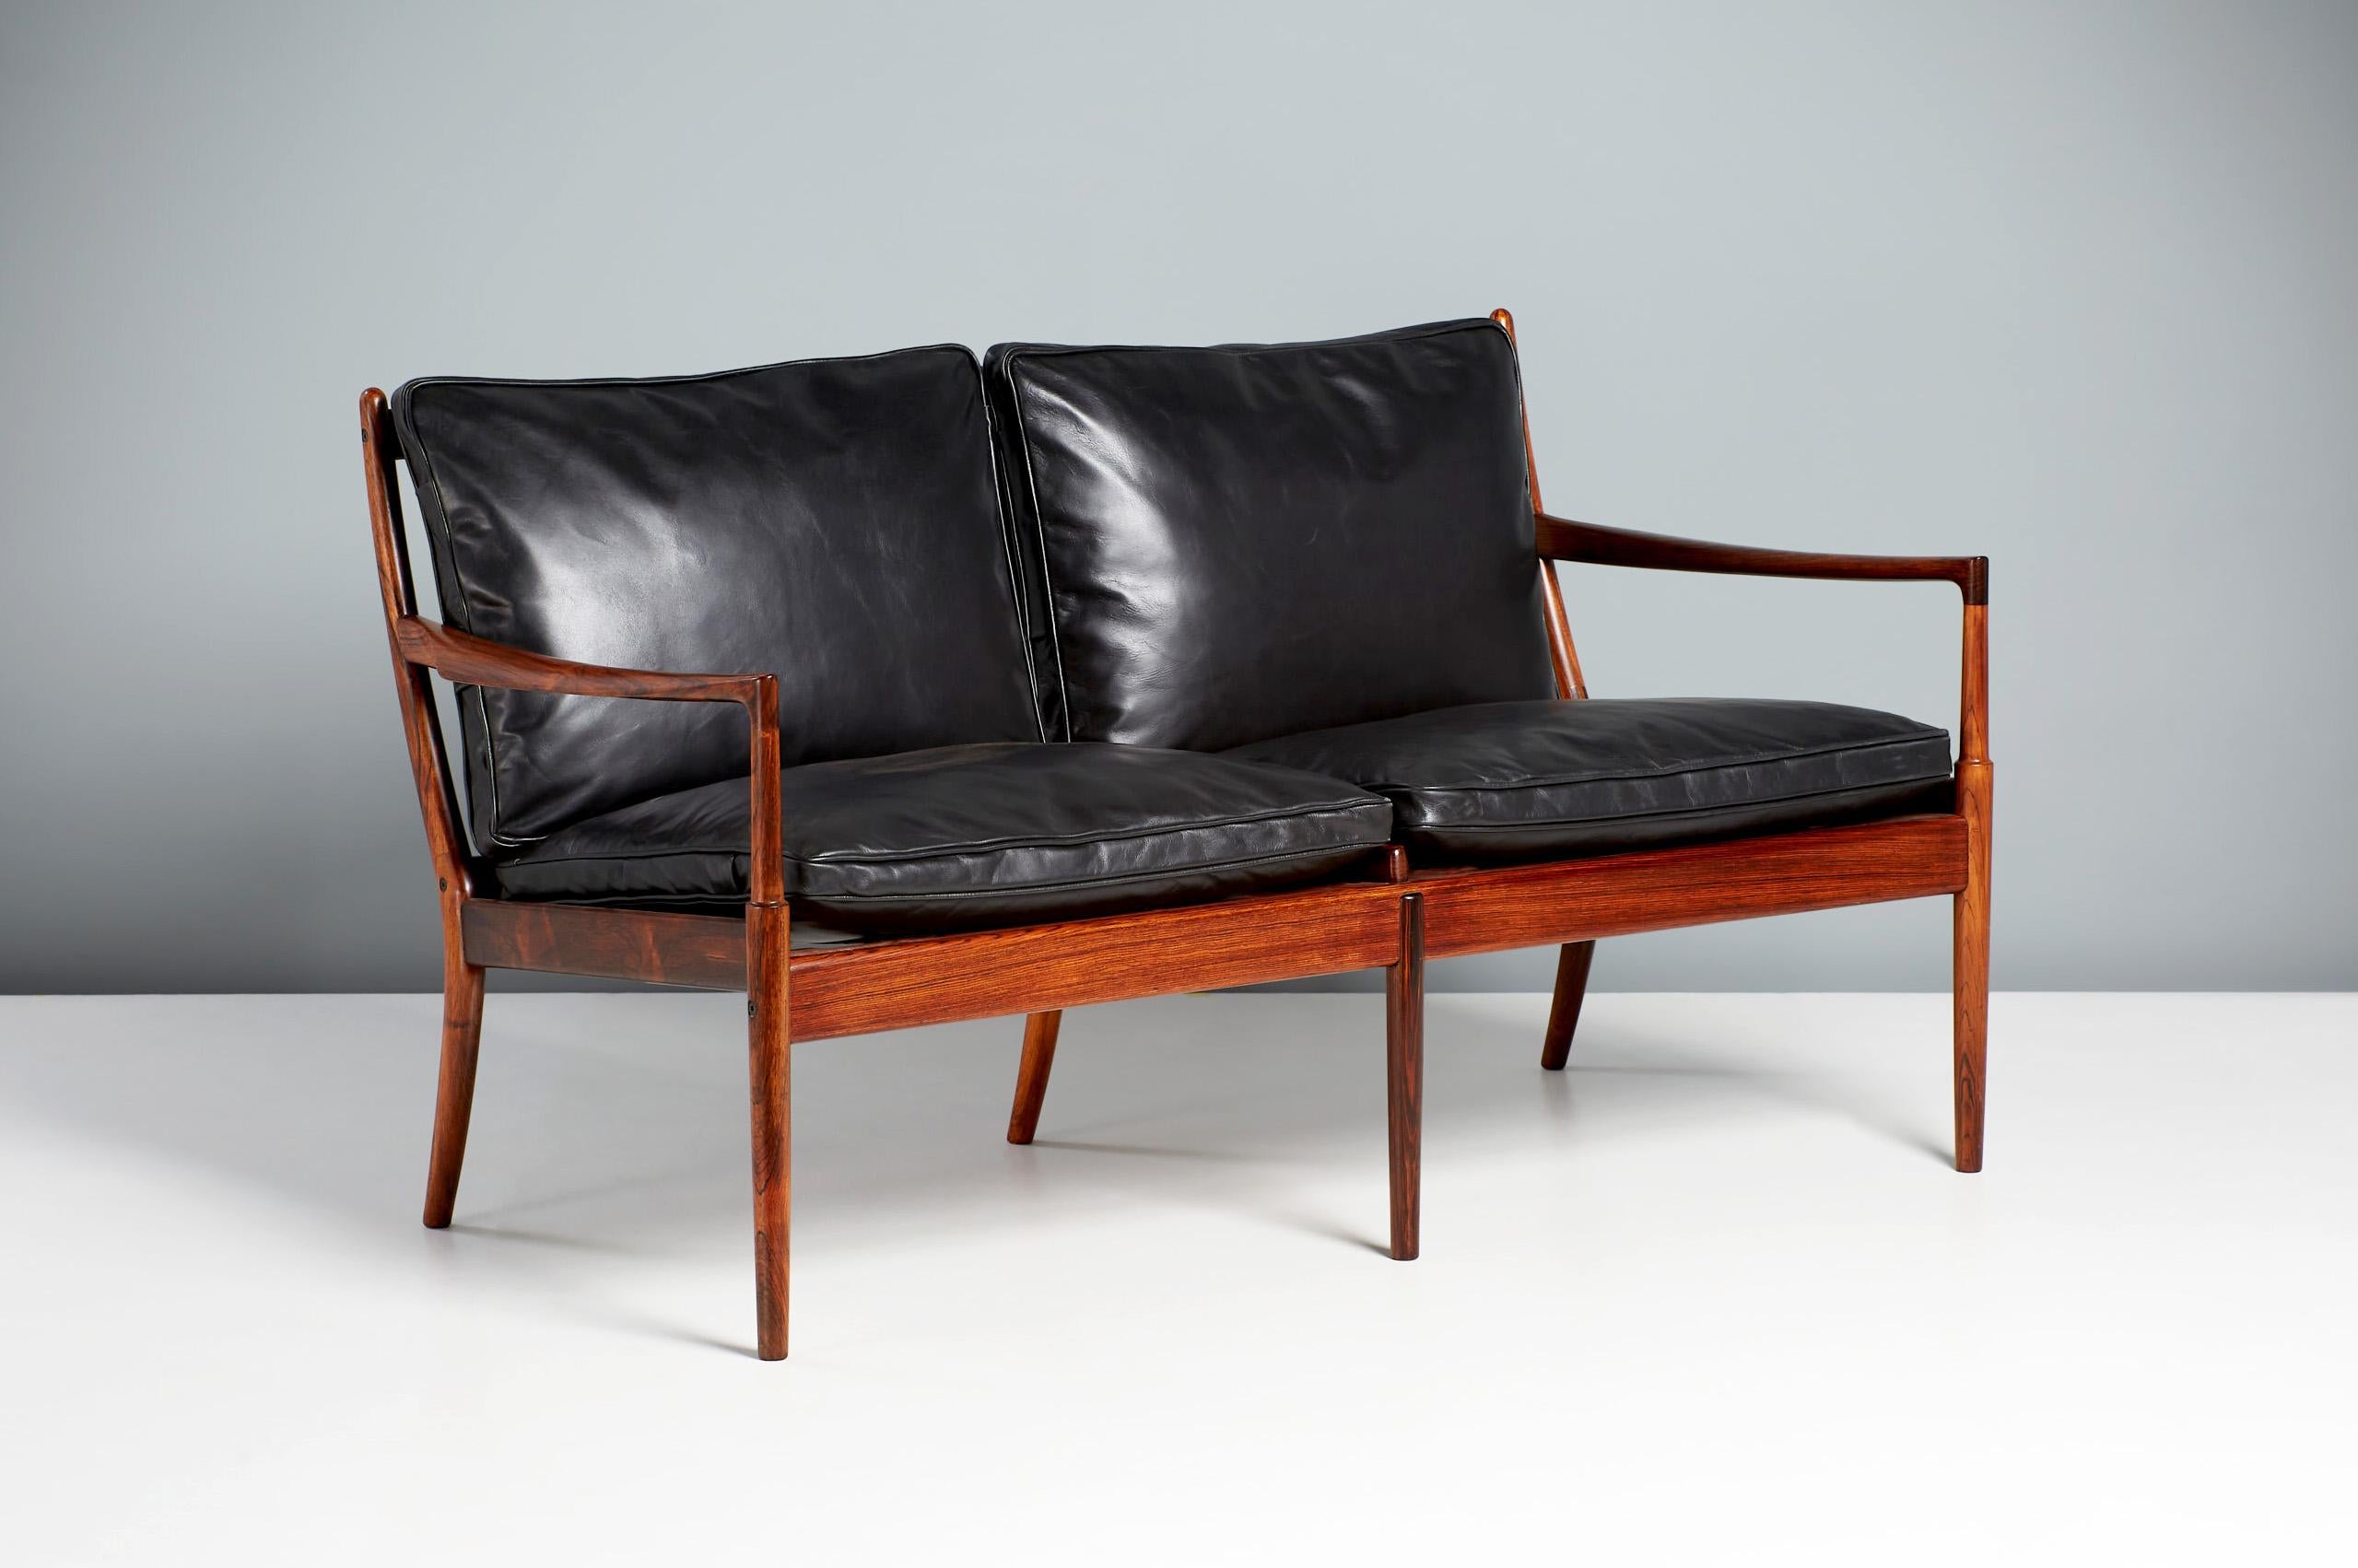 Ib Kofod-Larsen Rosewood Samso Sofa, circa 1960 In Excellent Condition For Sale In London, GB